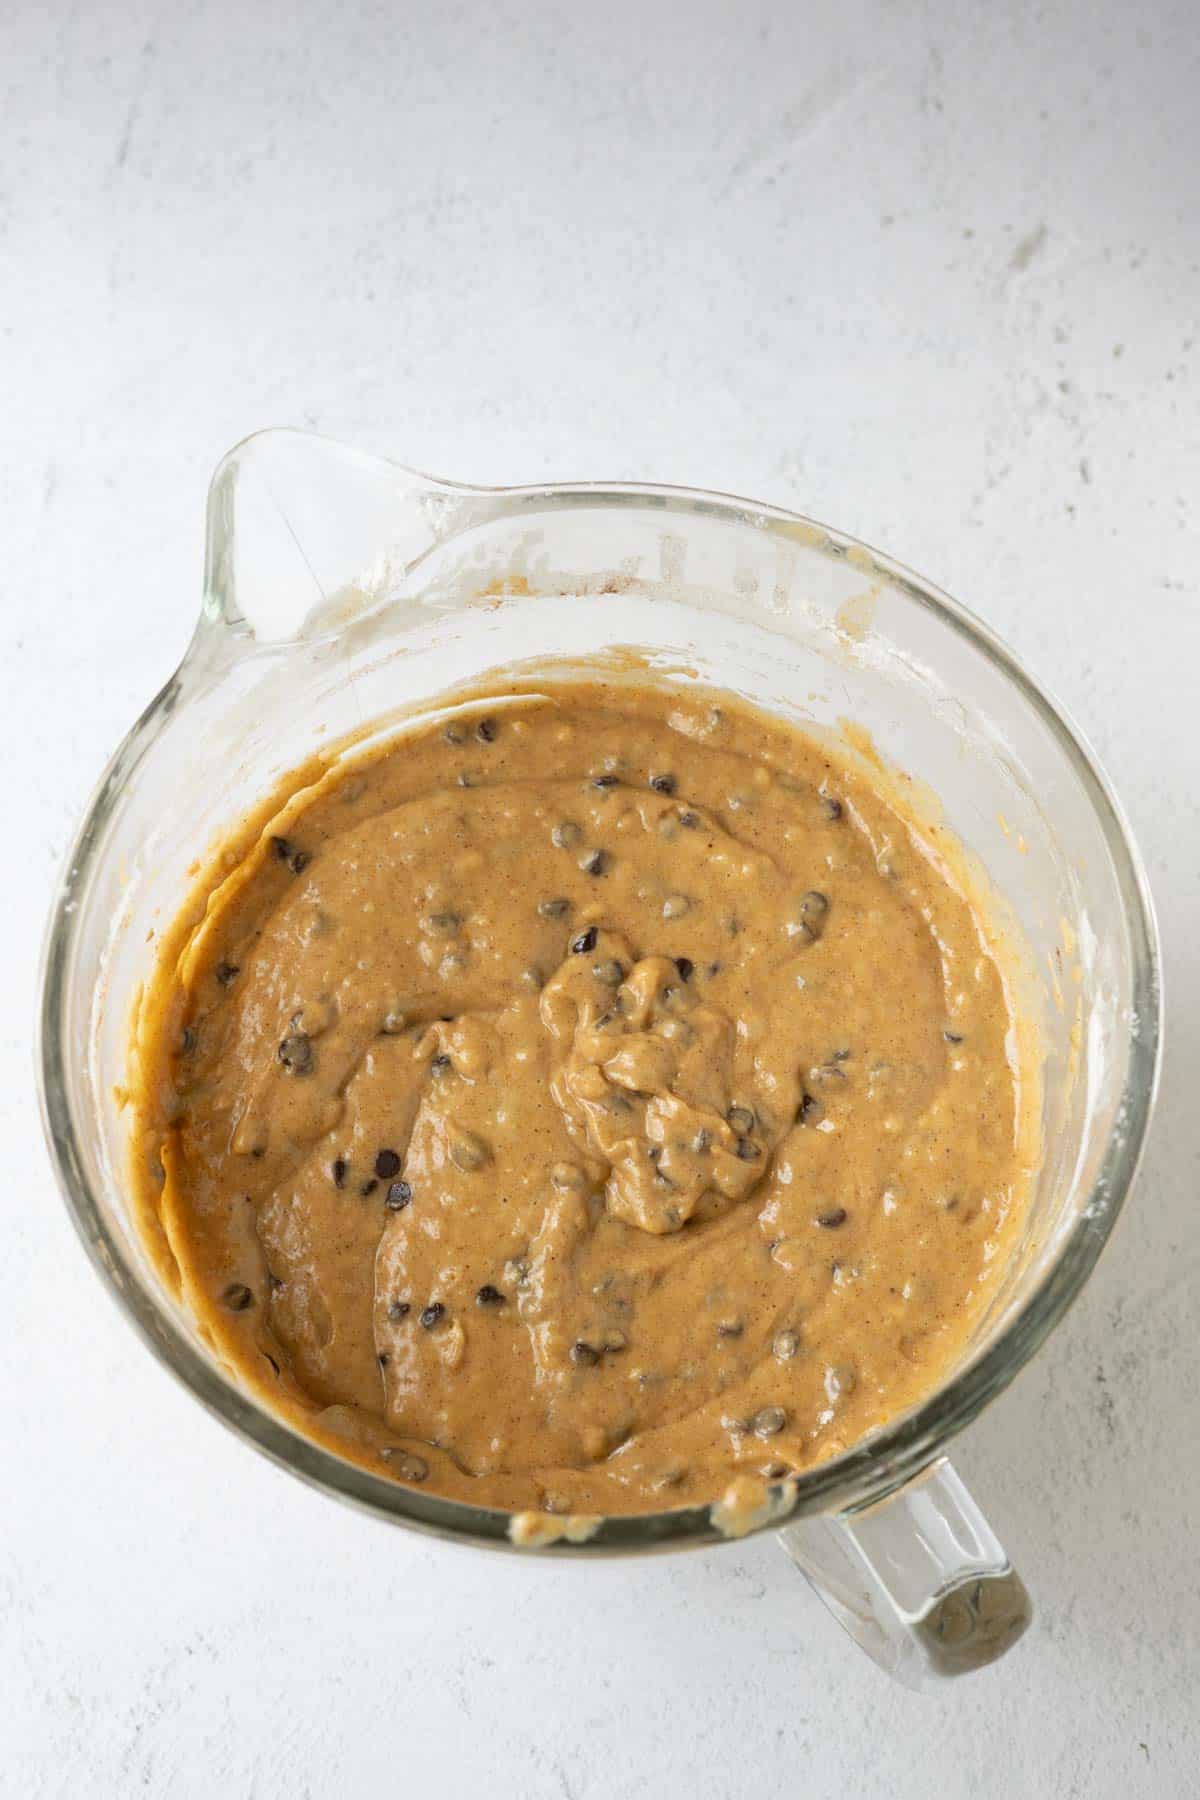 Pumpkin muffin batter with chocolate chips.